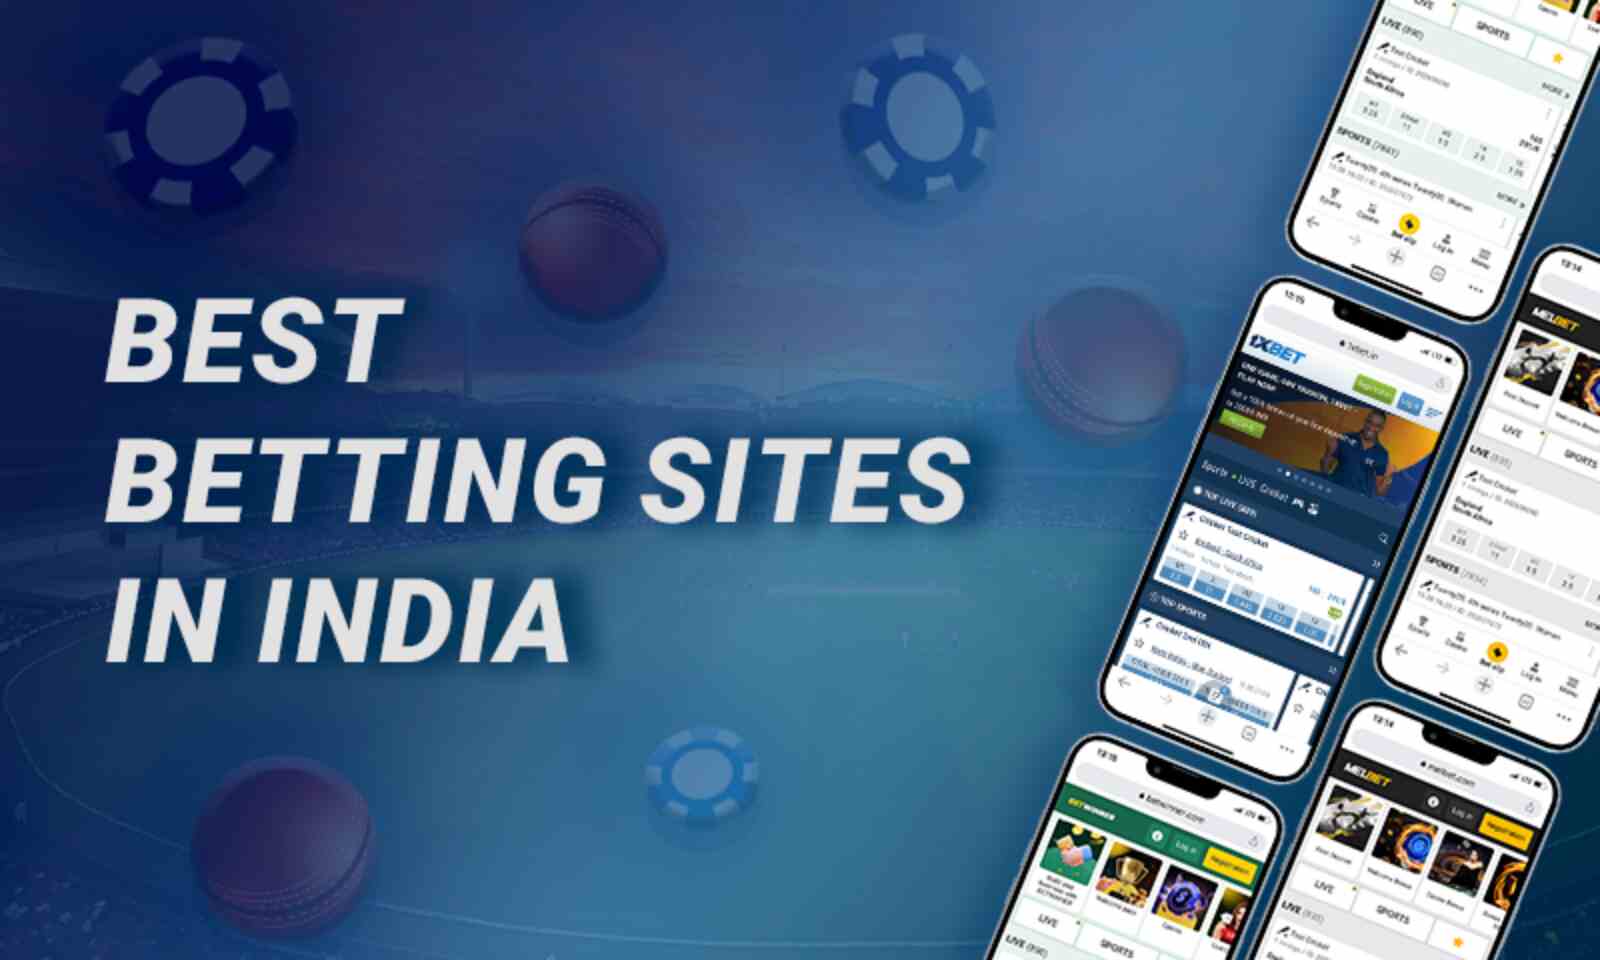 5 Stylish Ideas For Your Cricket Betting Apps For Android In India